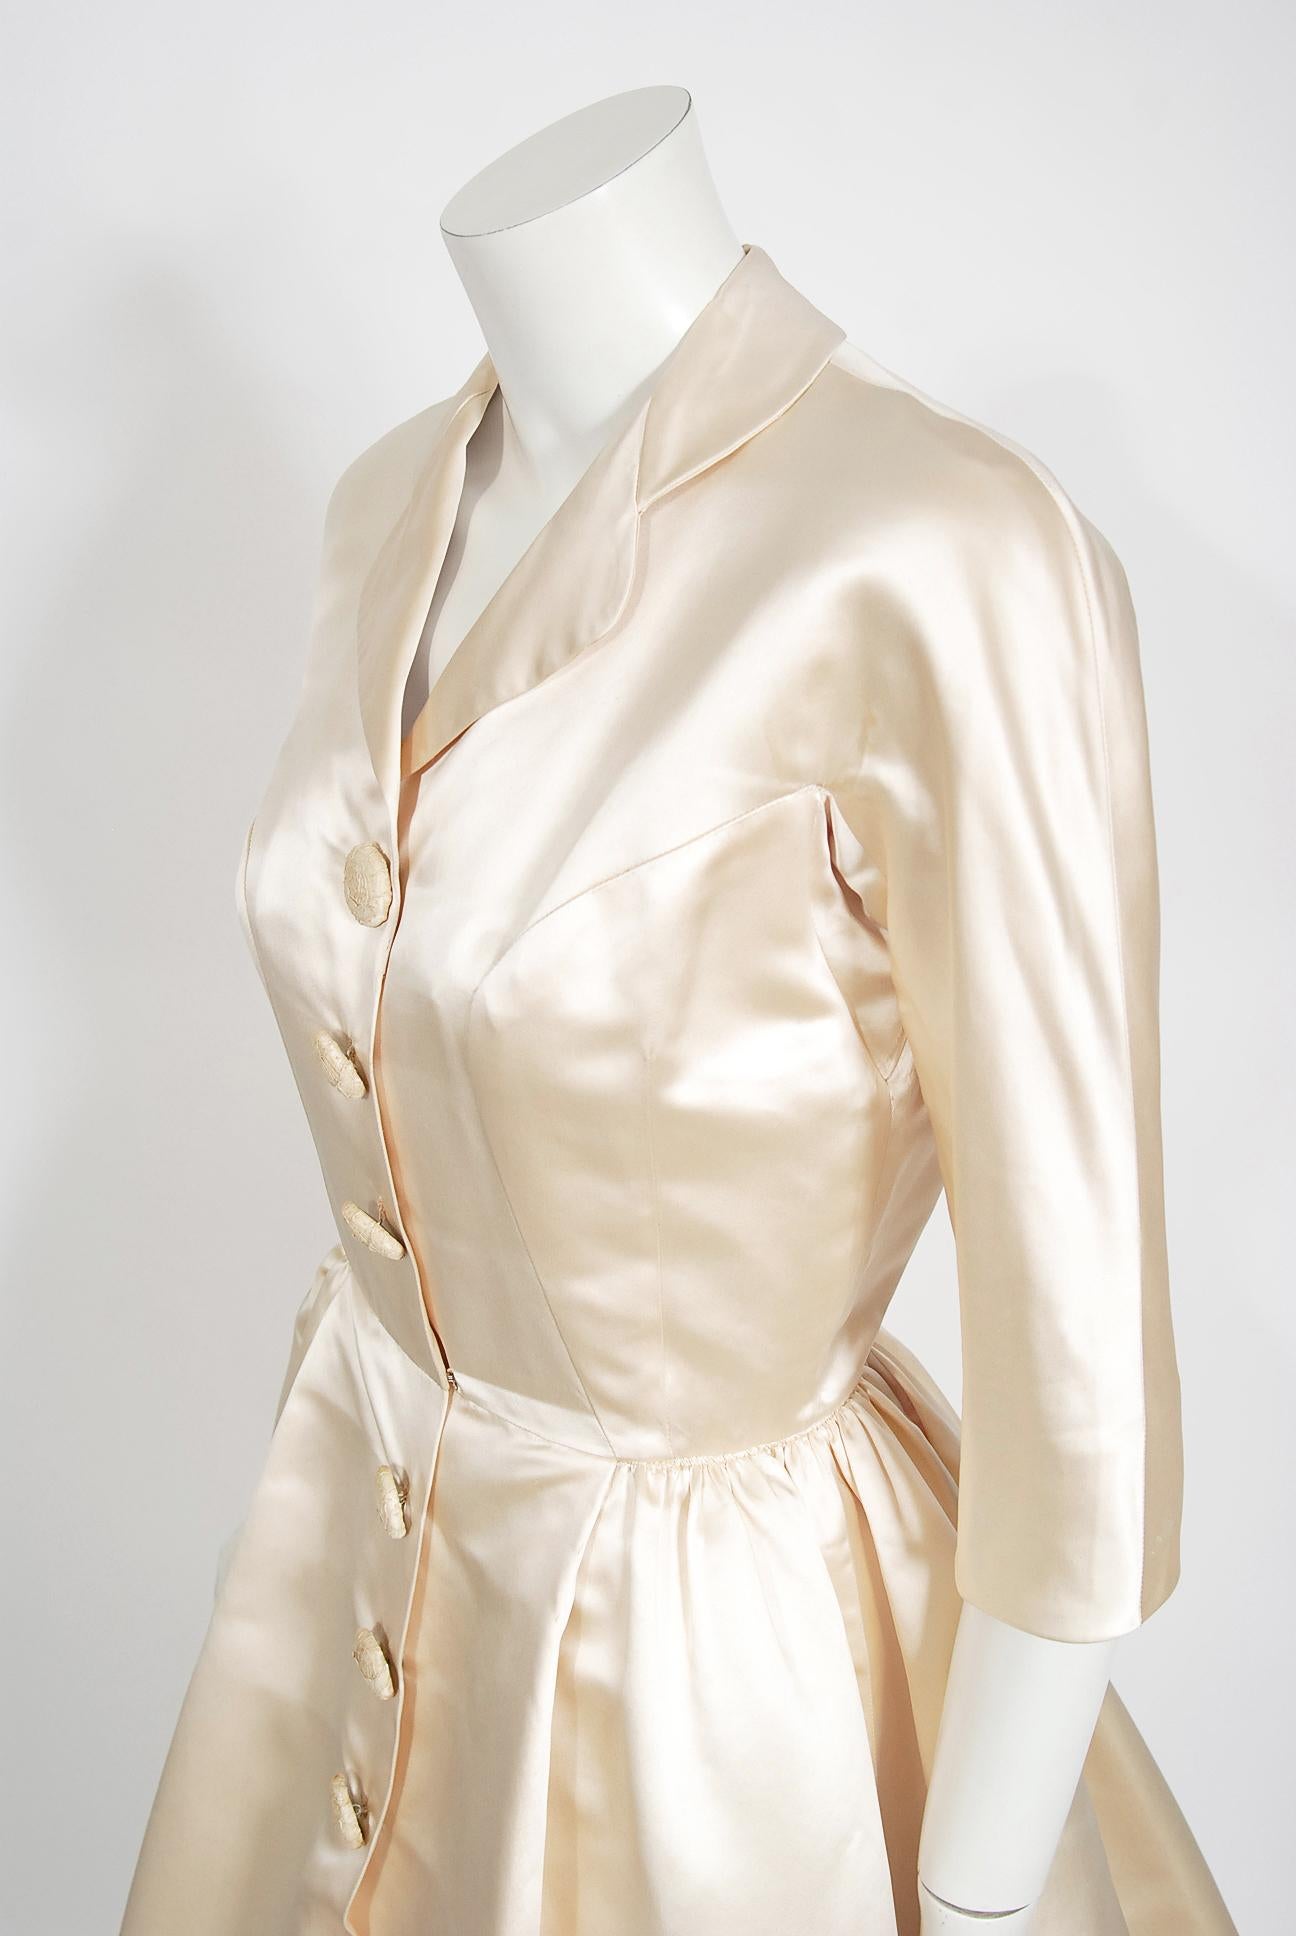 Vintage 1950's Traina-Norell Couture Ivory Silk Satin Full Skirted Bridal Dress 1